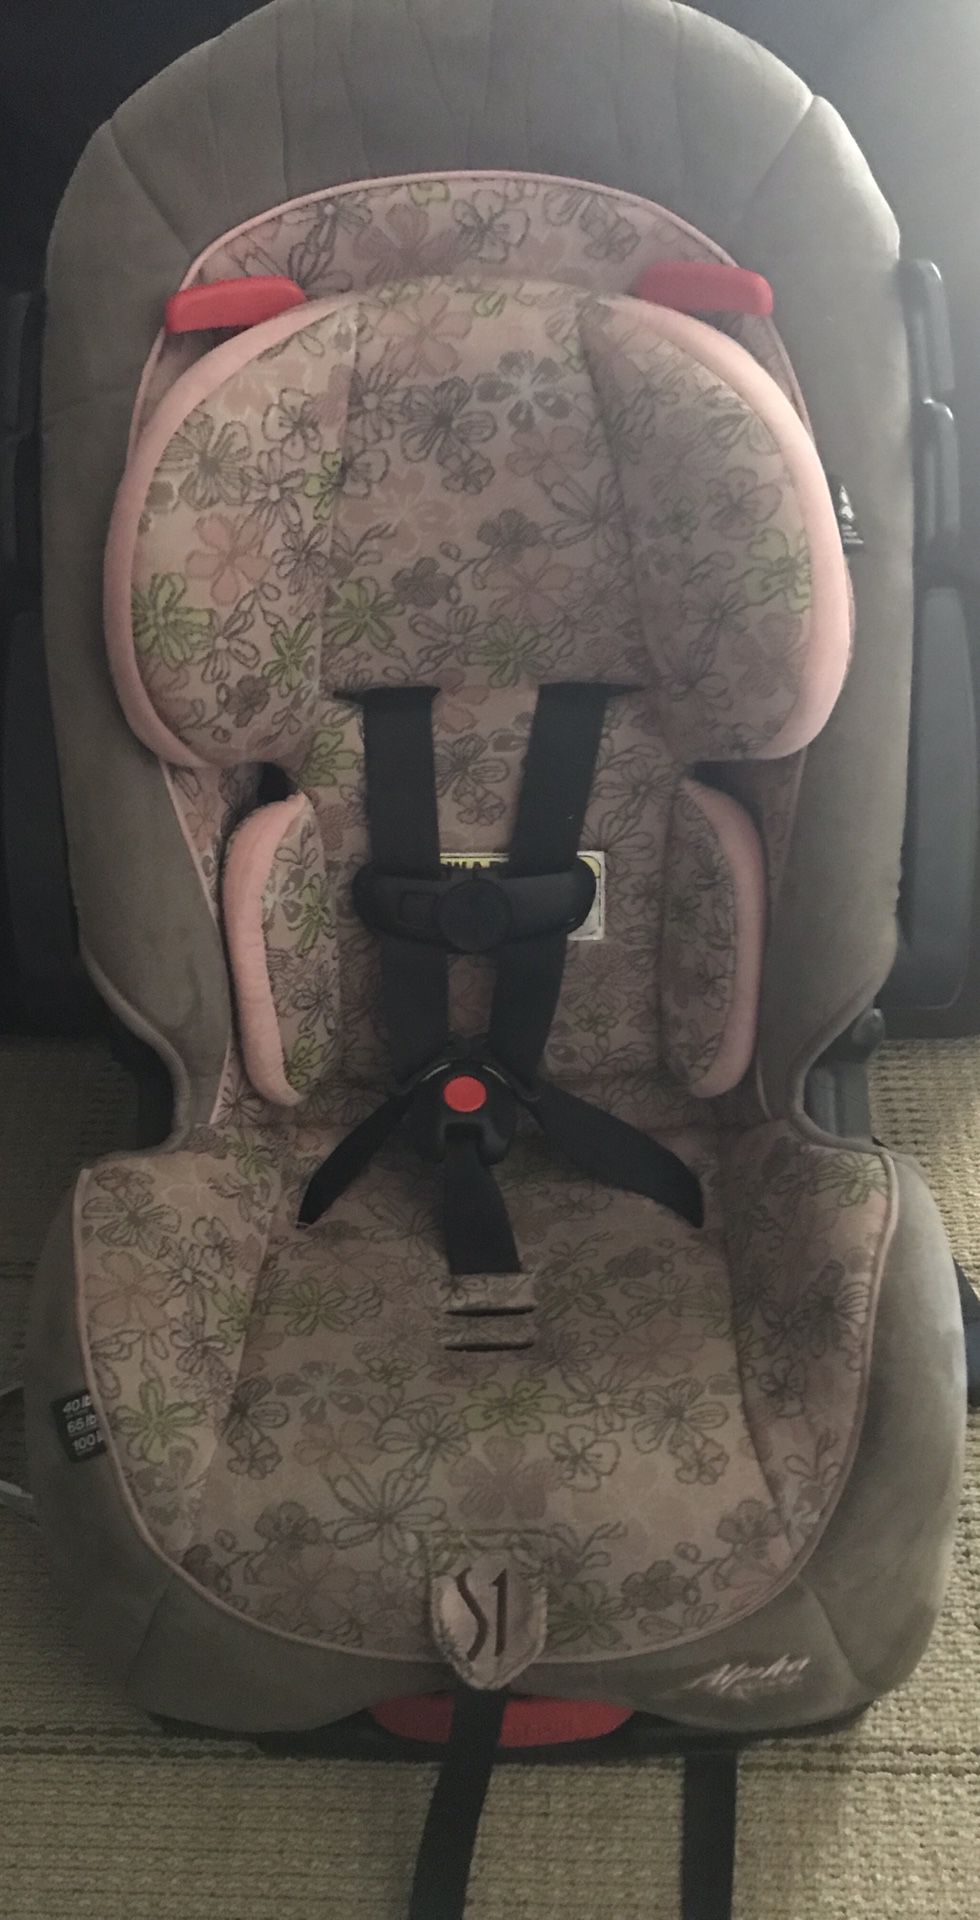 Safety 1st girl car seat